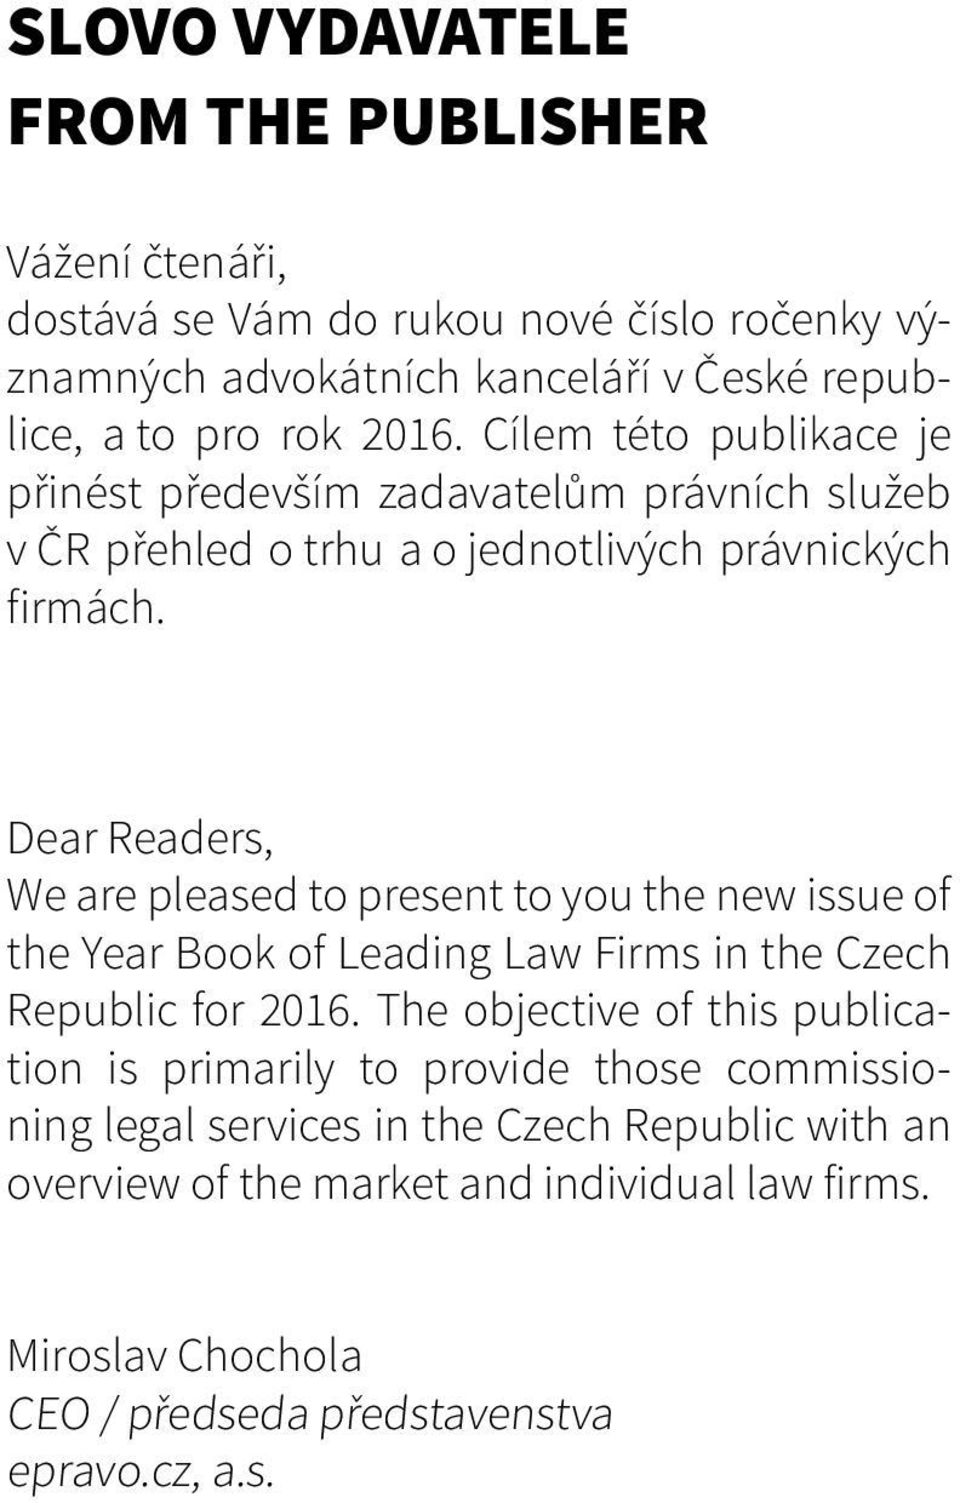 Dear Readers, We are pleased to present to you the new issue of the Year Book of Leading Law Firms in the Czech Republic for 2016.